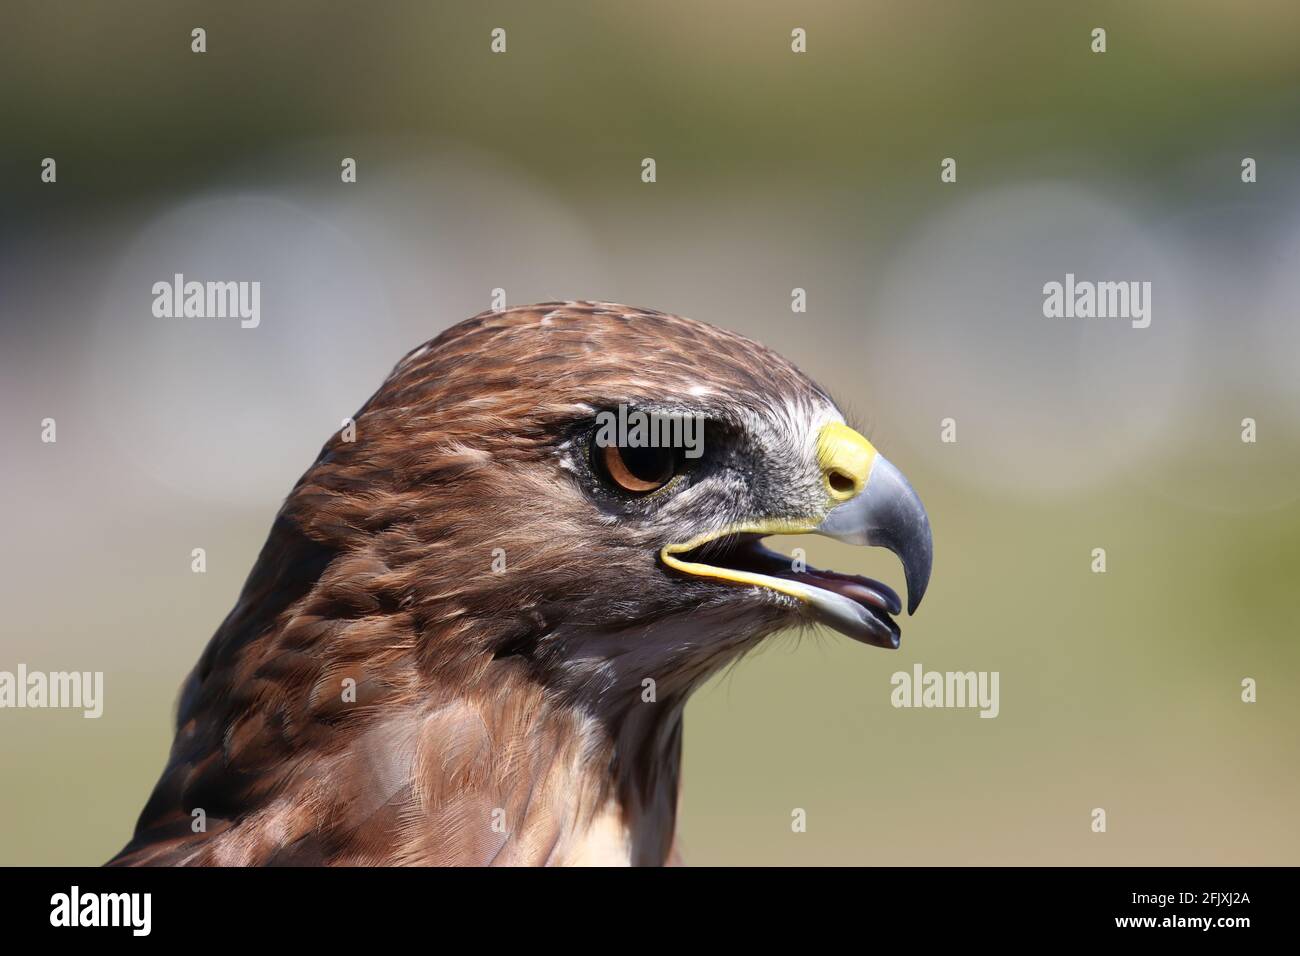 Majestic red-tailed hawk bird of prey head close-up Stock Photo